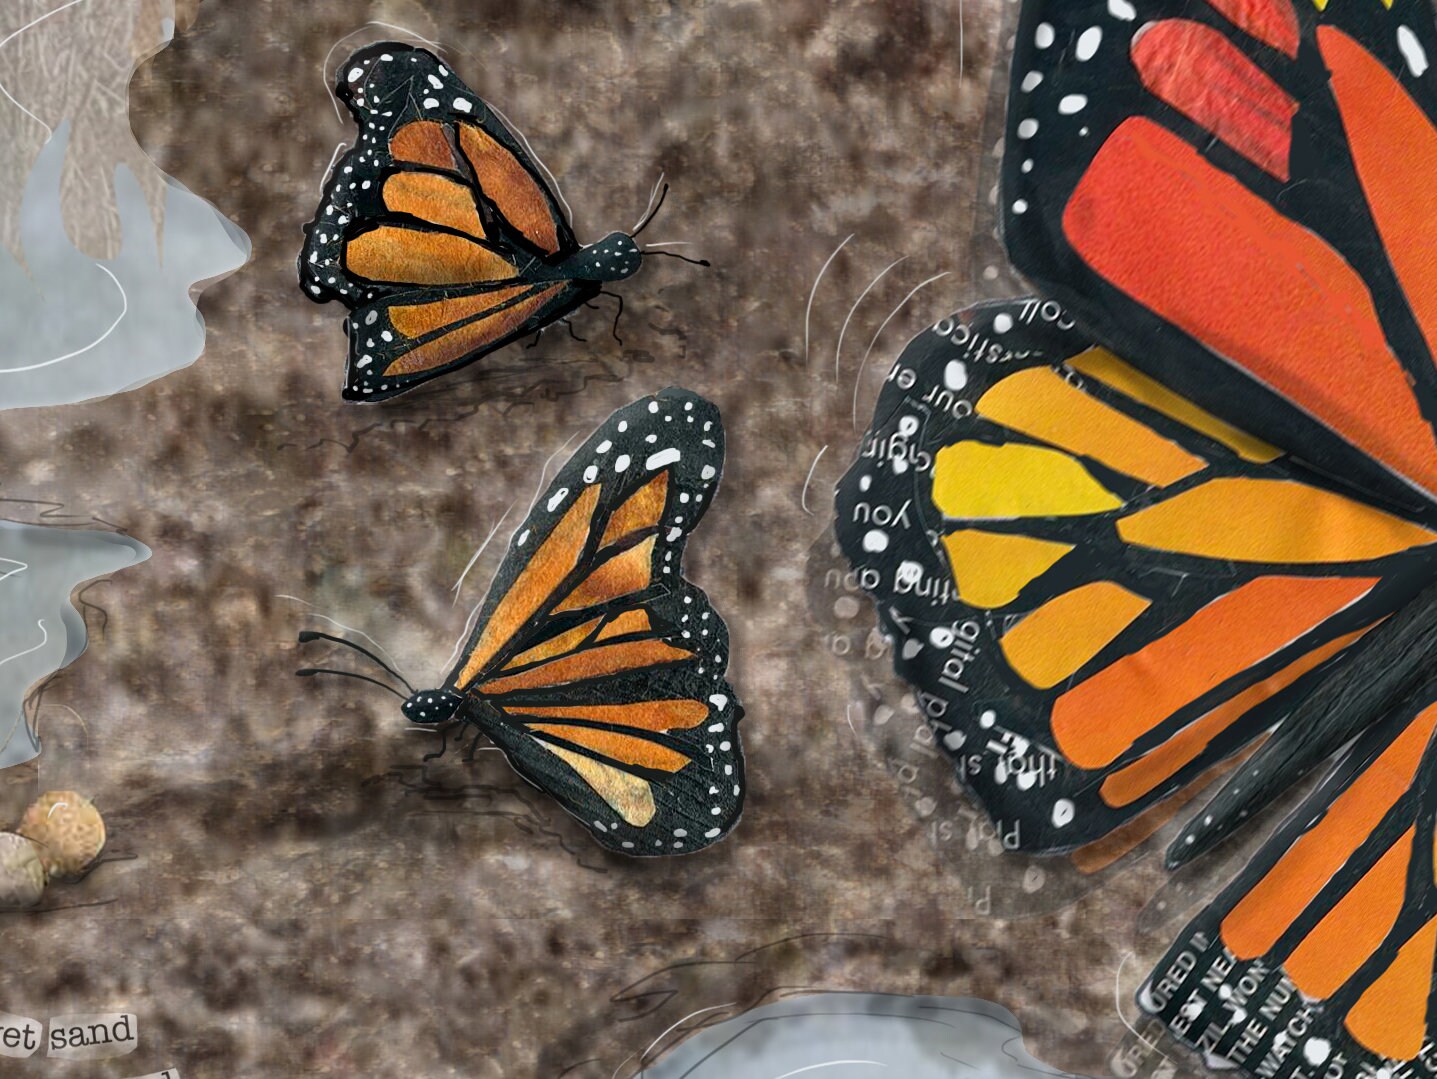 Greeting Card of mixed media collage of monarch butterflies puddling, Yellowstone - Blank Inside